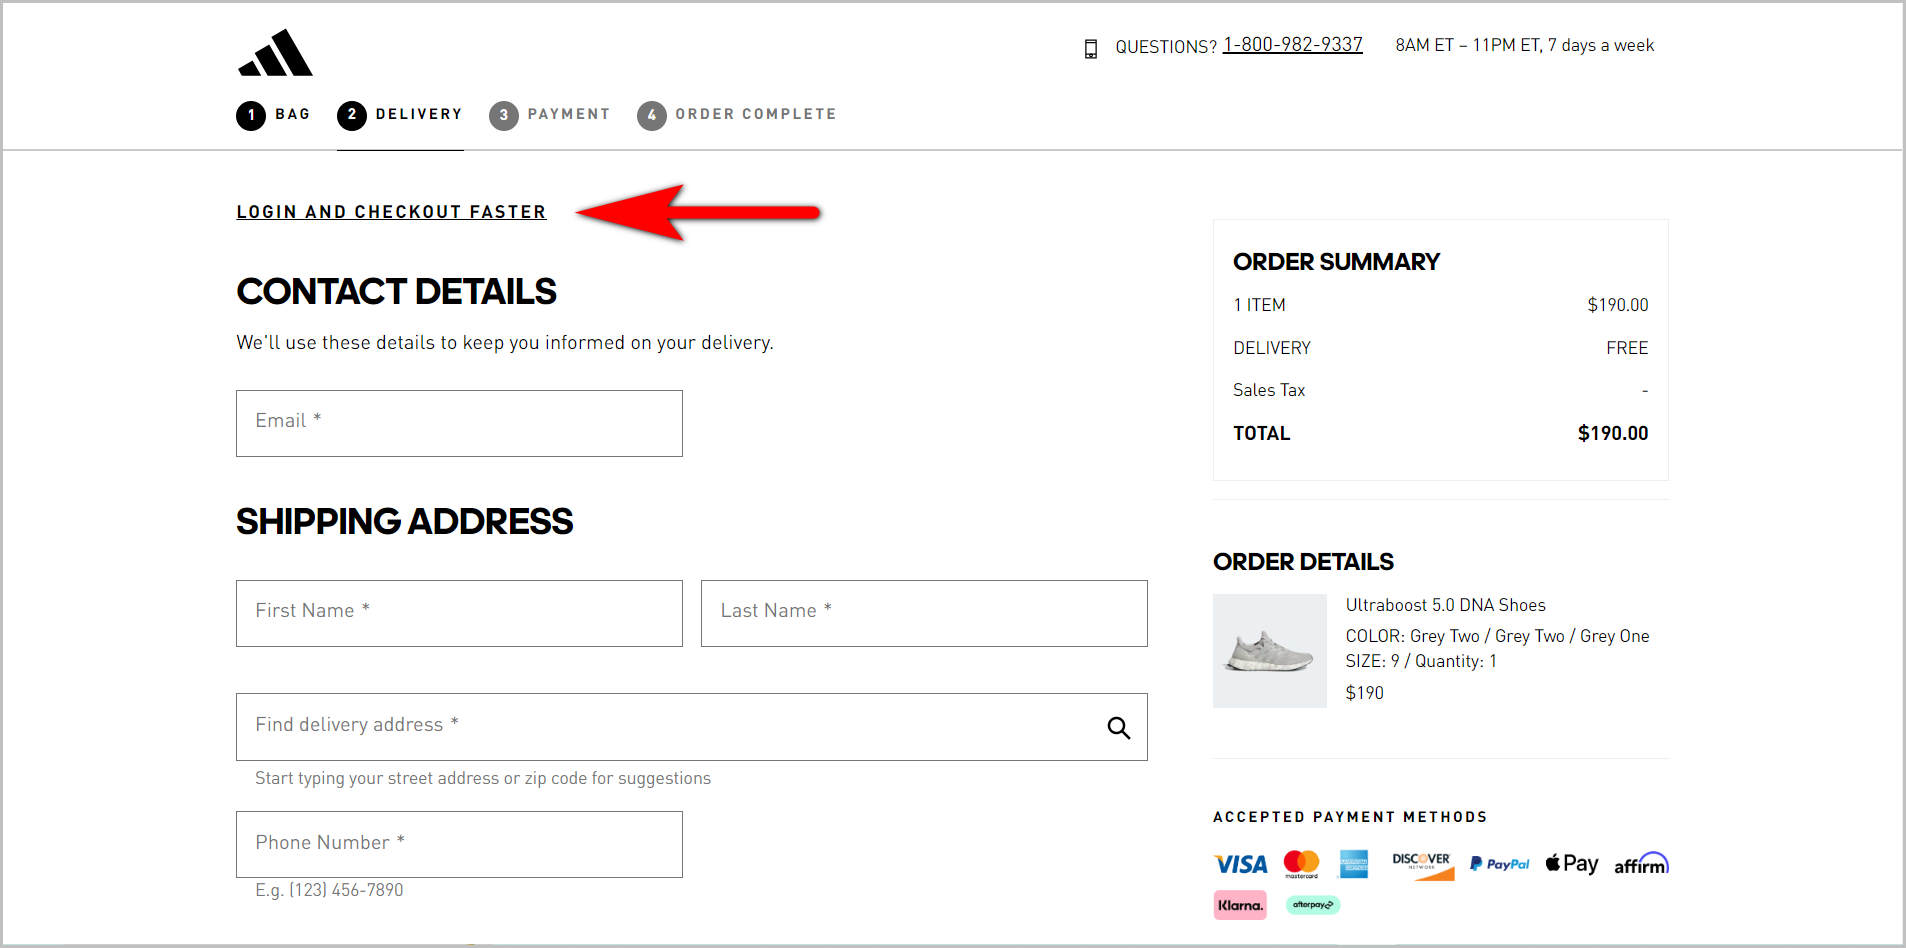  E-commerce checkout best practices example – Delivery page with a login text link at the top, above the e-mail input field